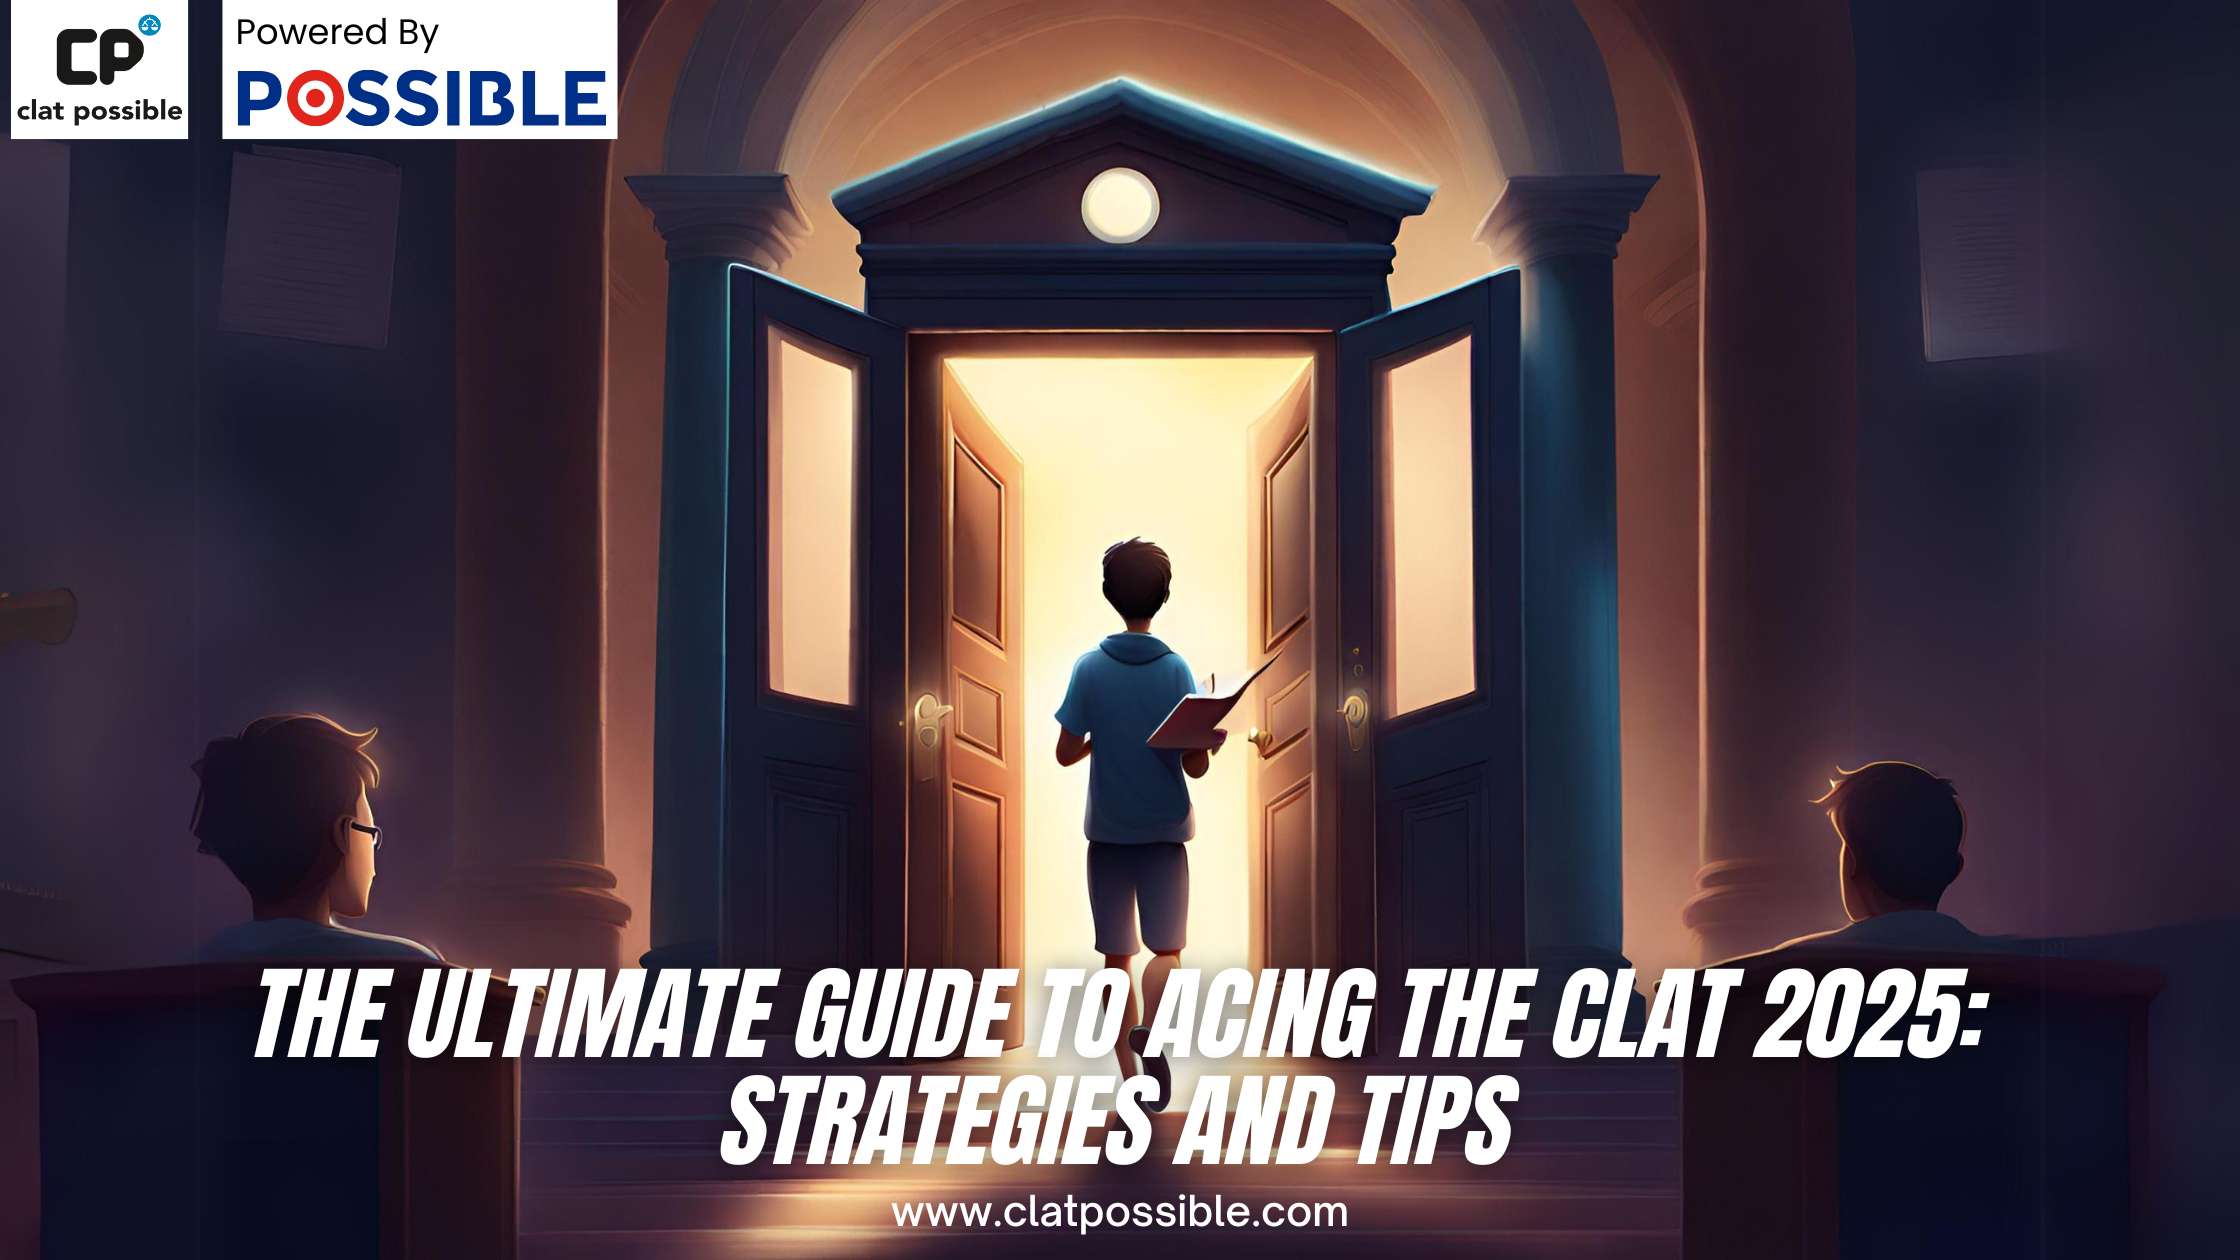 The Ultimate Guide to Acing the CLAT 2025: Strategies and Tips